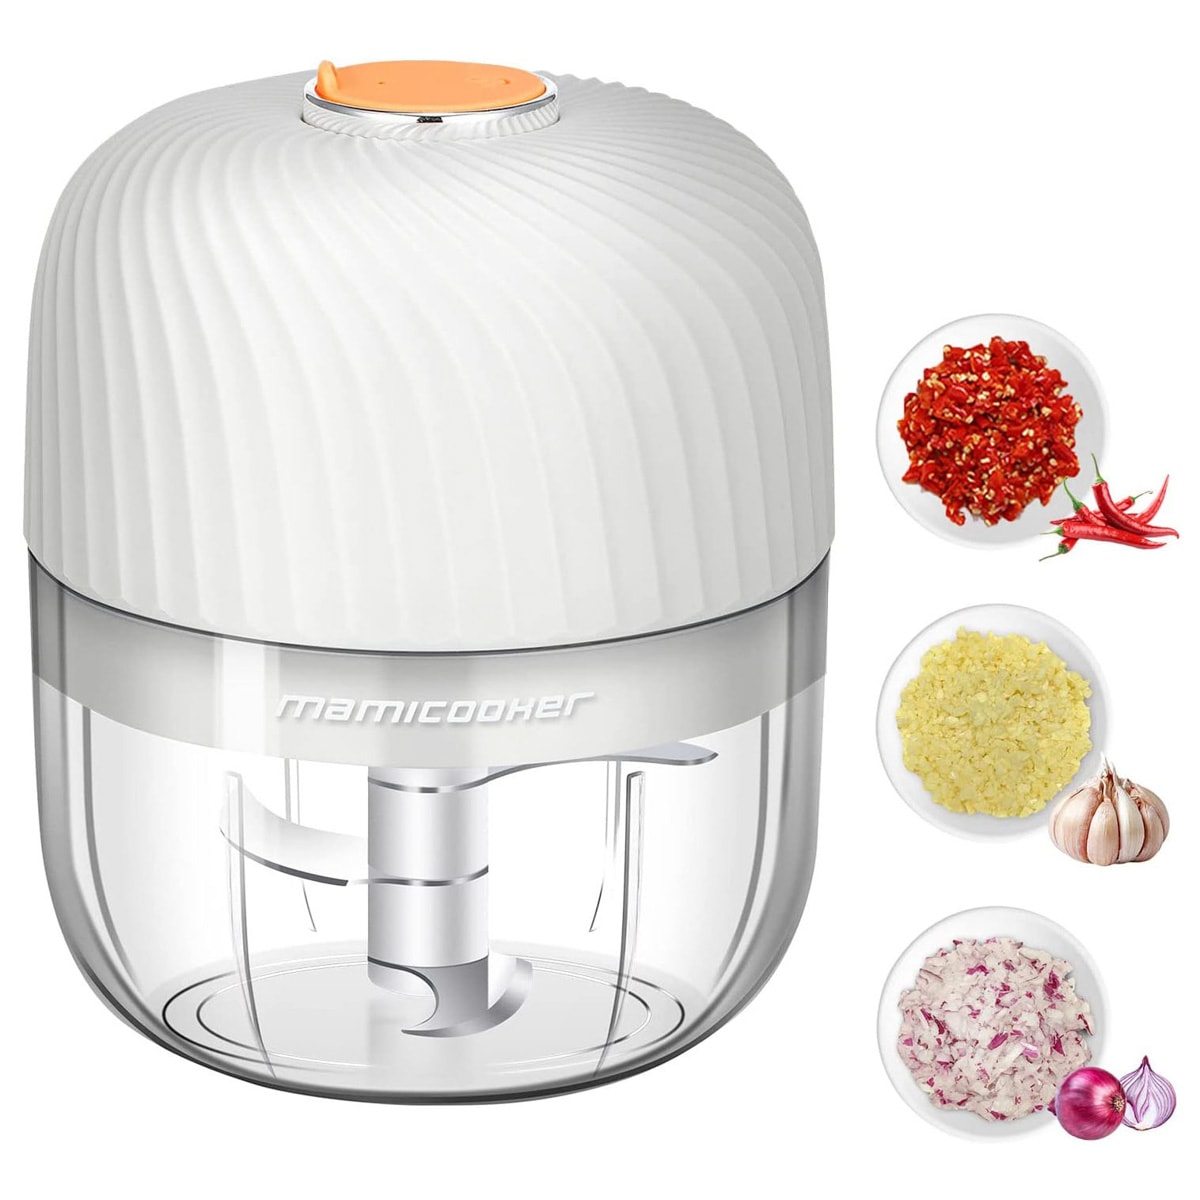 An electric garlic chopper with demonstration photos.